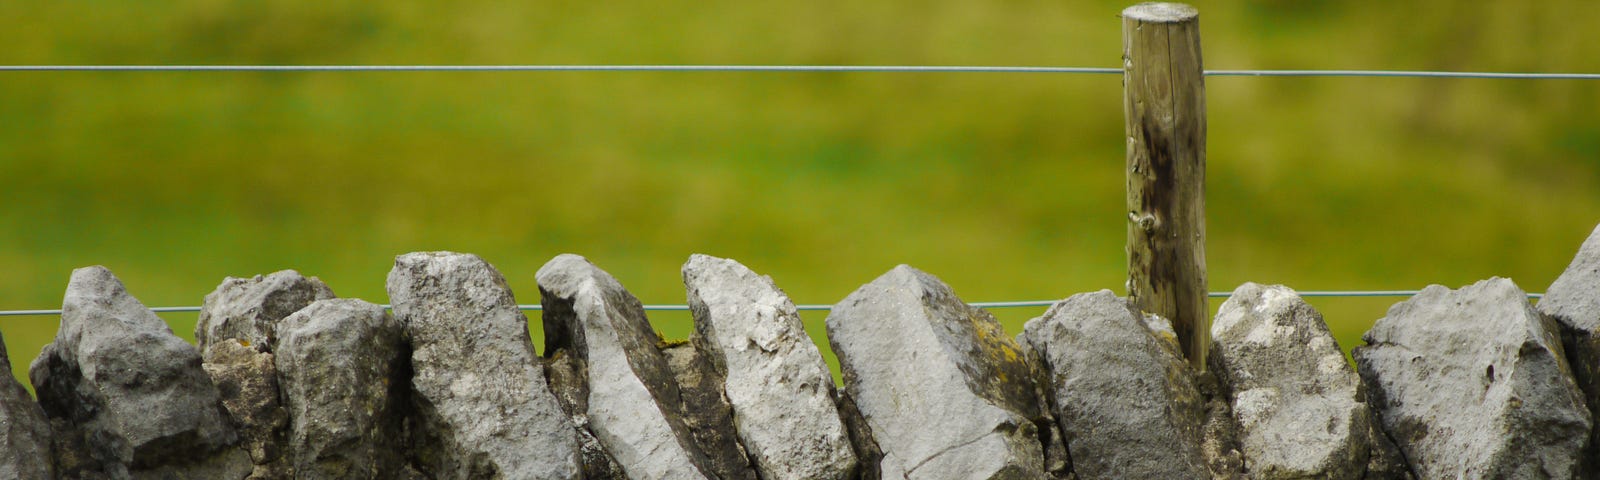 rock wall with wire strung above as in a boundary